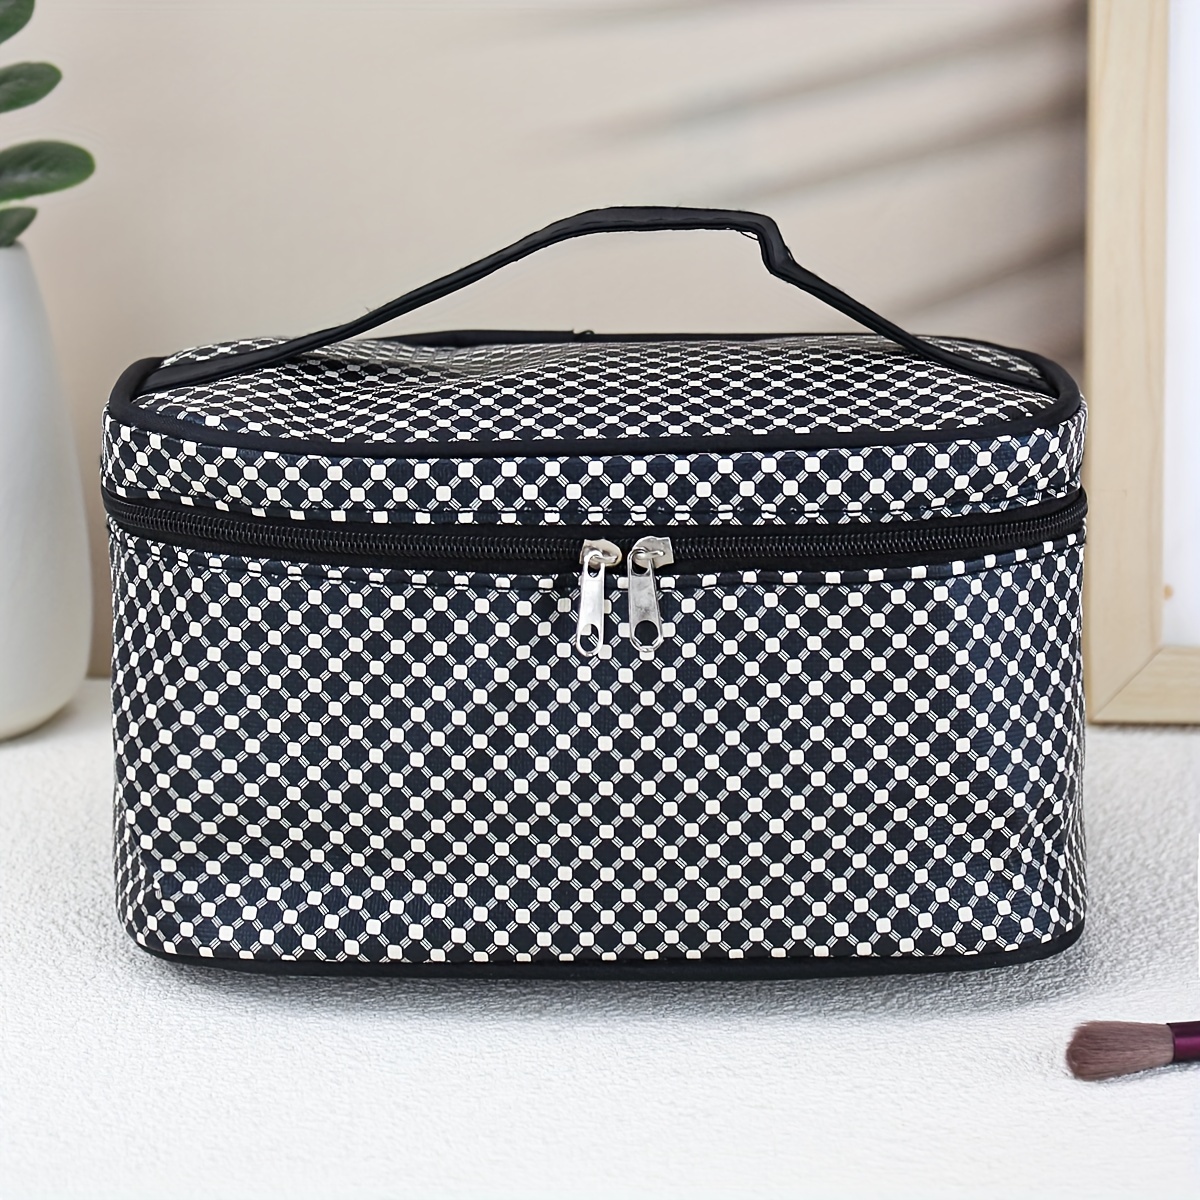 

Portable Makeup Bag, Cosmetic Organizer, Convenient For Home & Travel Daily Use, Black & White Geometric Pattern Design